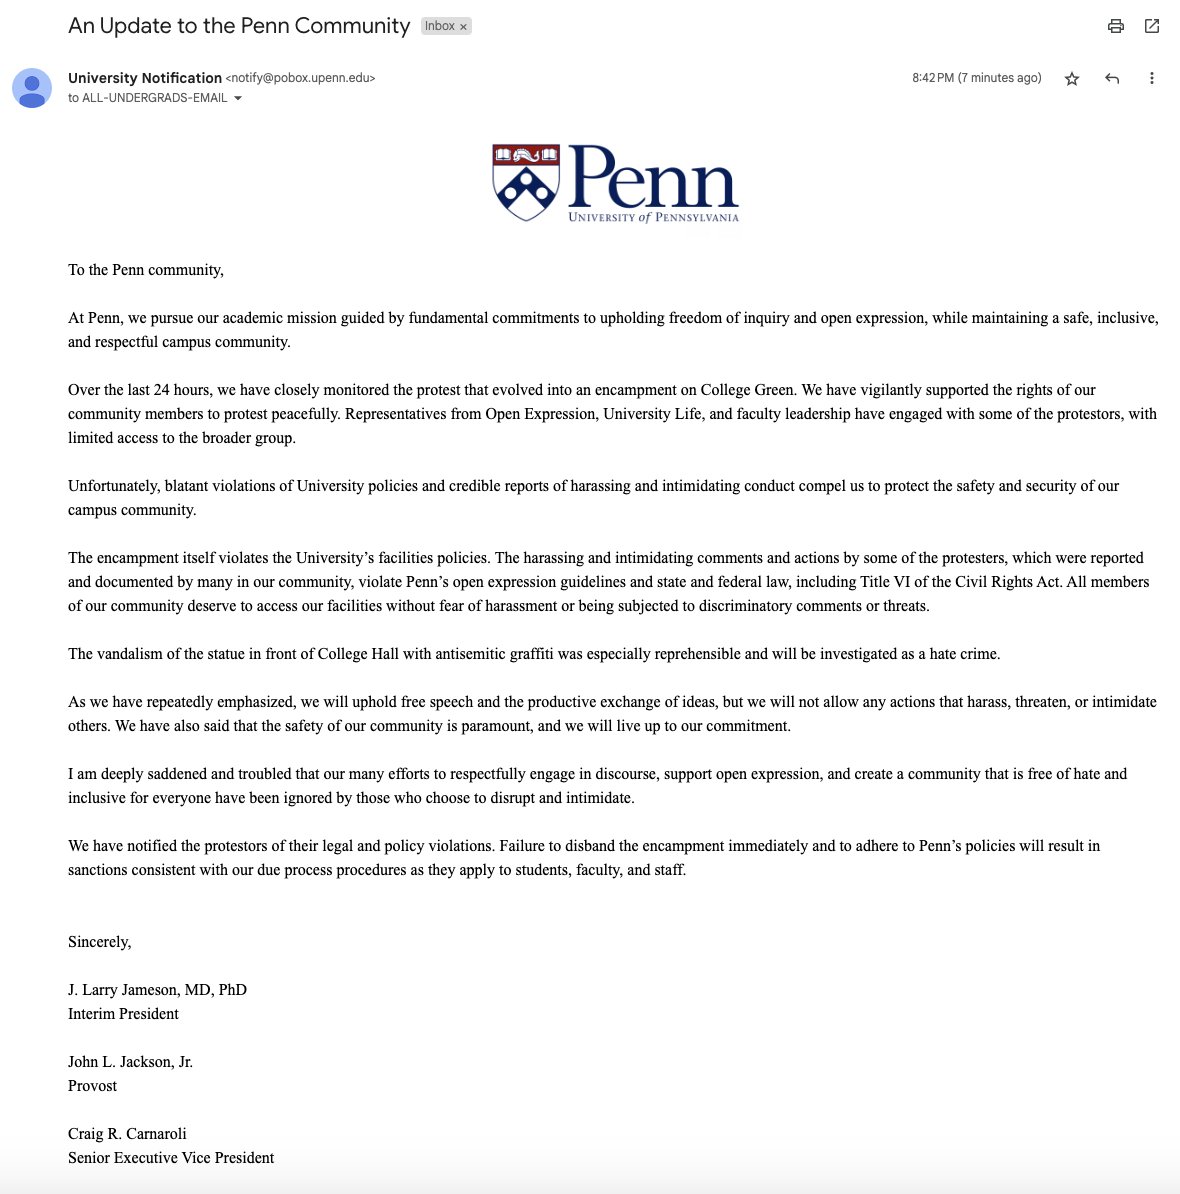 BREAKING: Penn issued its first warning to protesters of legal and policy violations and called on the College Green encampment to disband 'immediately' — the first indication the University is considering action against the pro-Palestinian demonstration. Story TK in @dailypenn